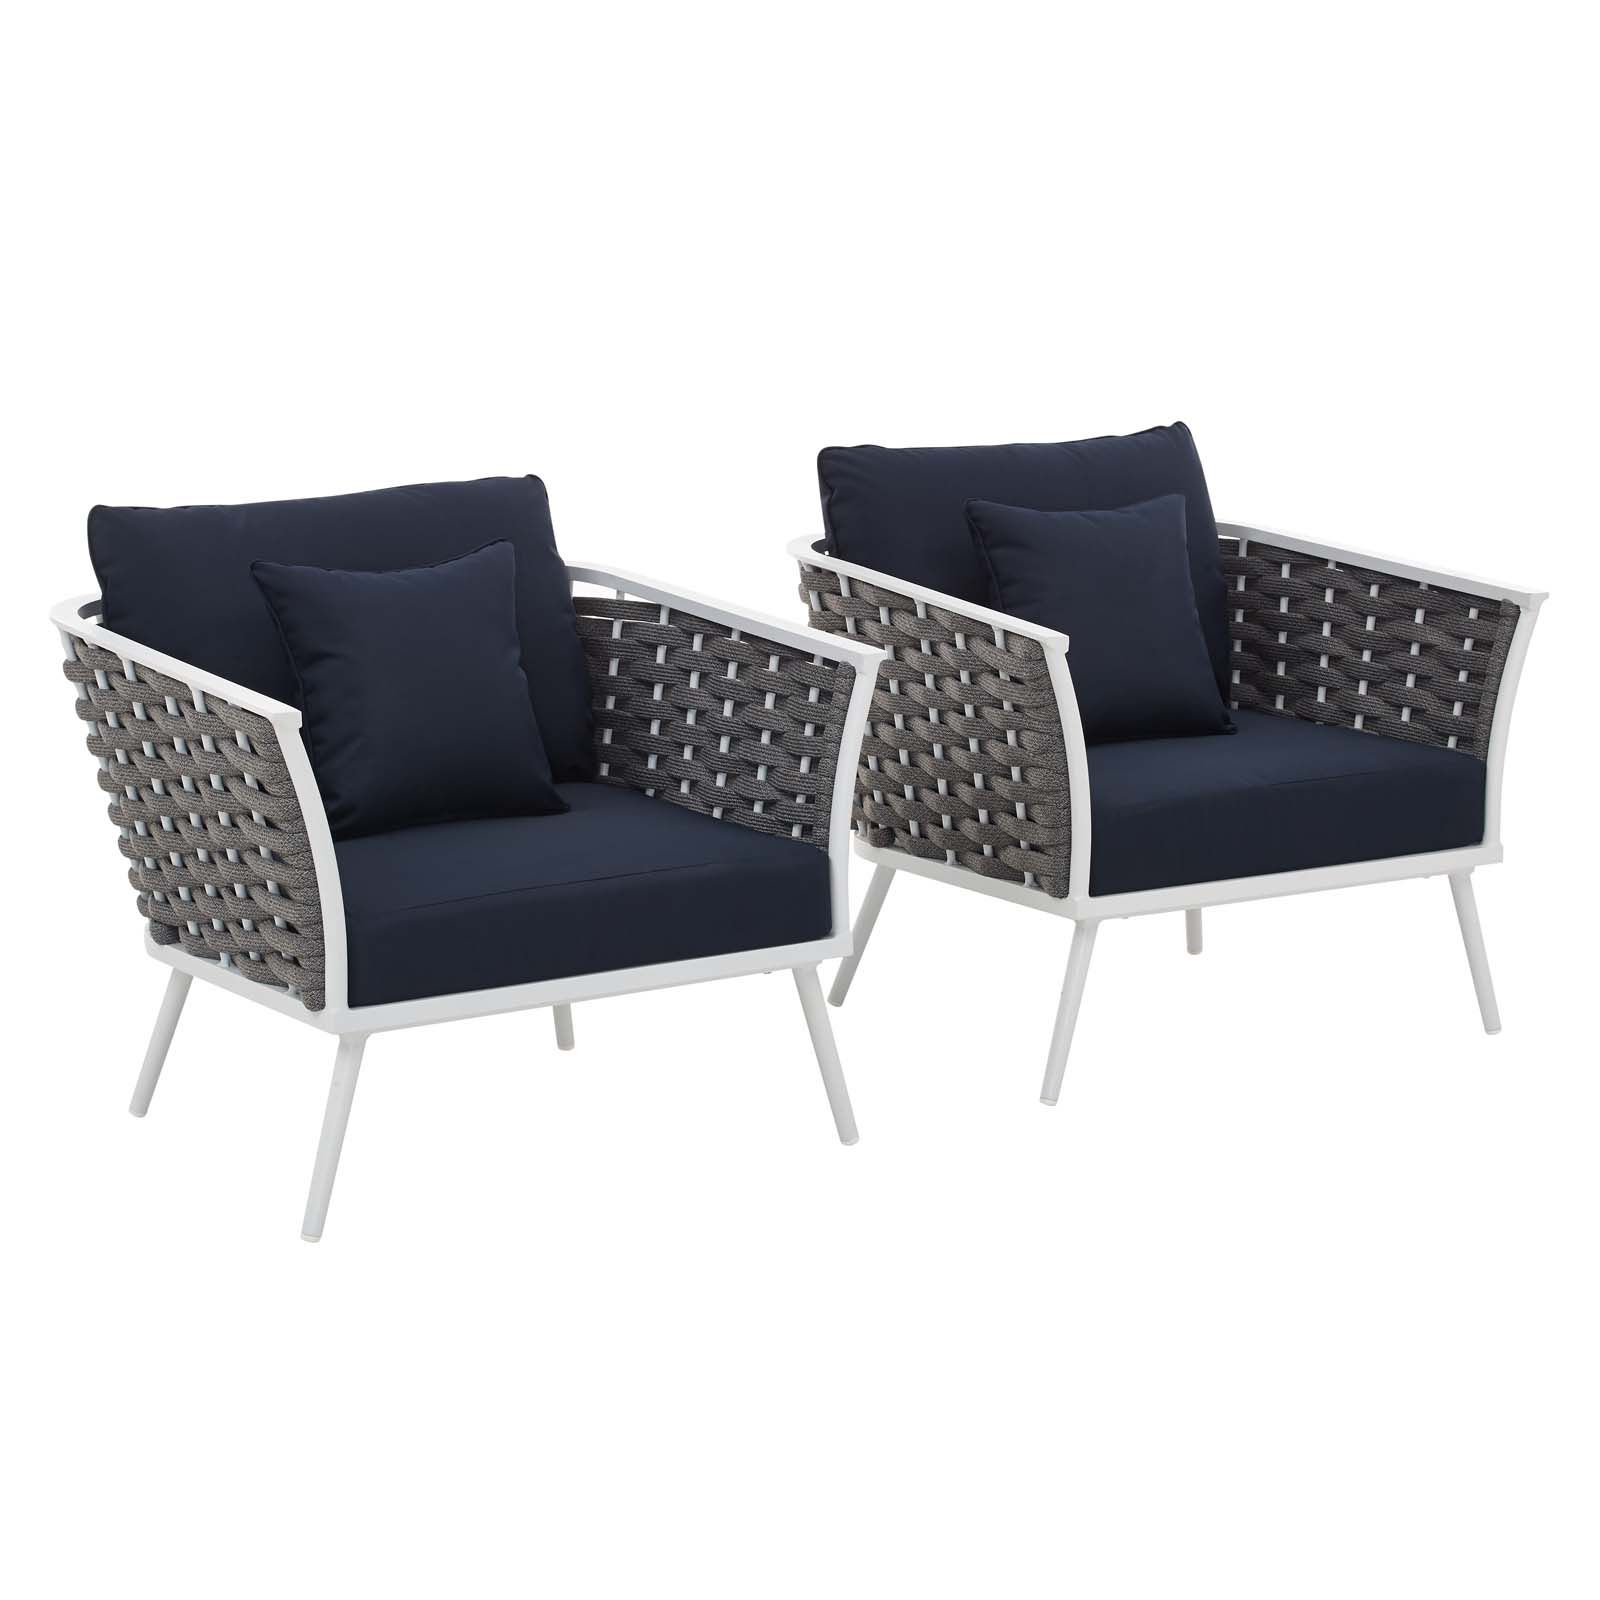 Most Recent Fabric Outdoor Patio Sets For Modern Contemporary Urban Design Outdoor Patio Balcony Garden Furniture (View 2 of 15)